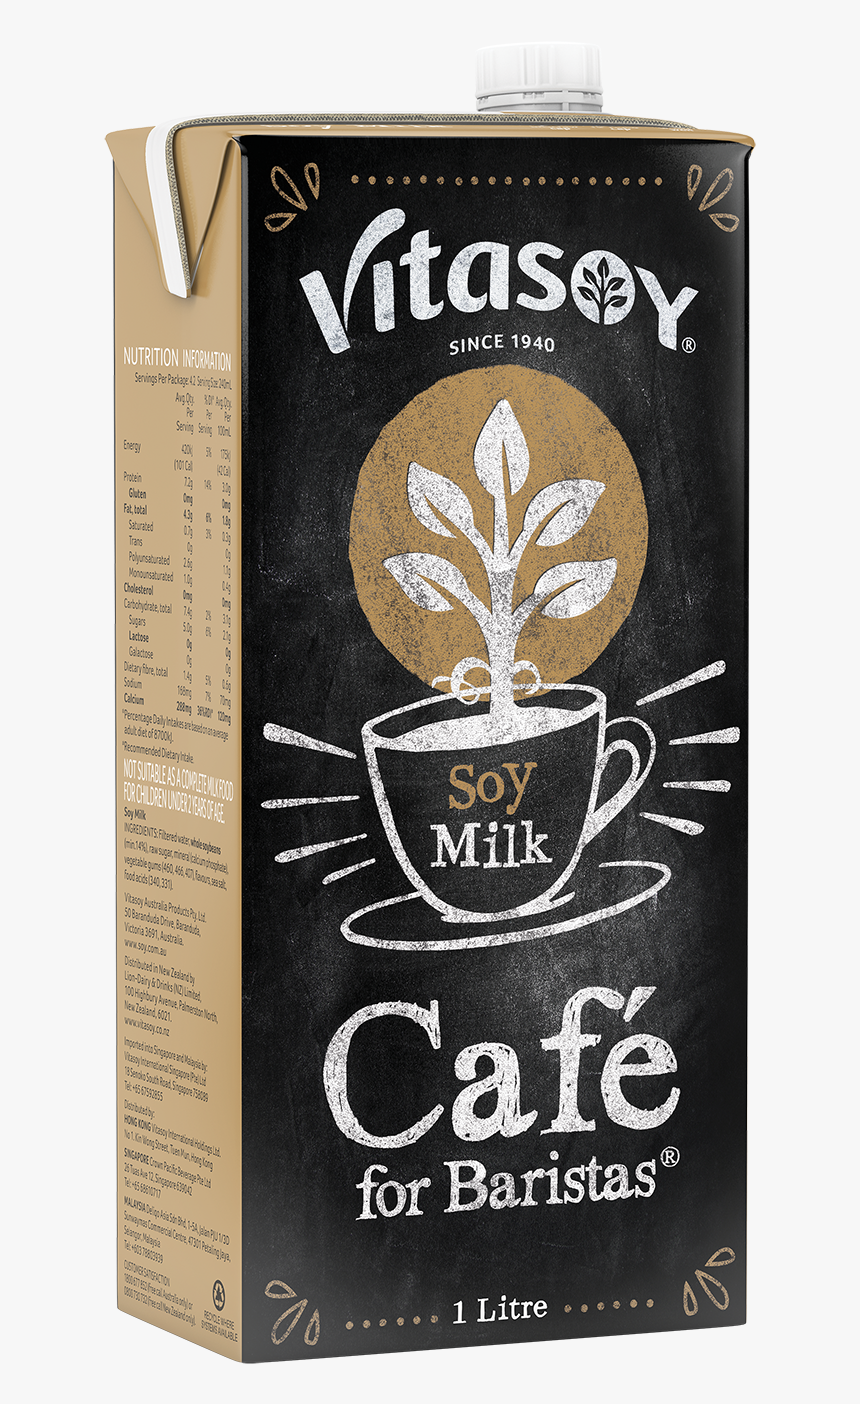 Vitasoy Café For Barista - Vitasoy Cafe For Baristas, HD Png Download, Free Download